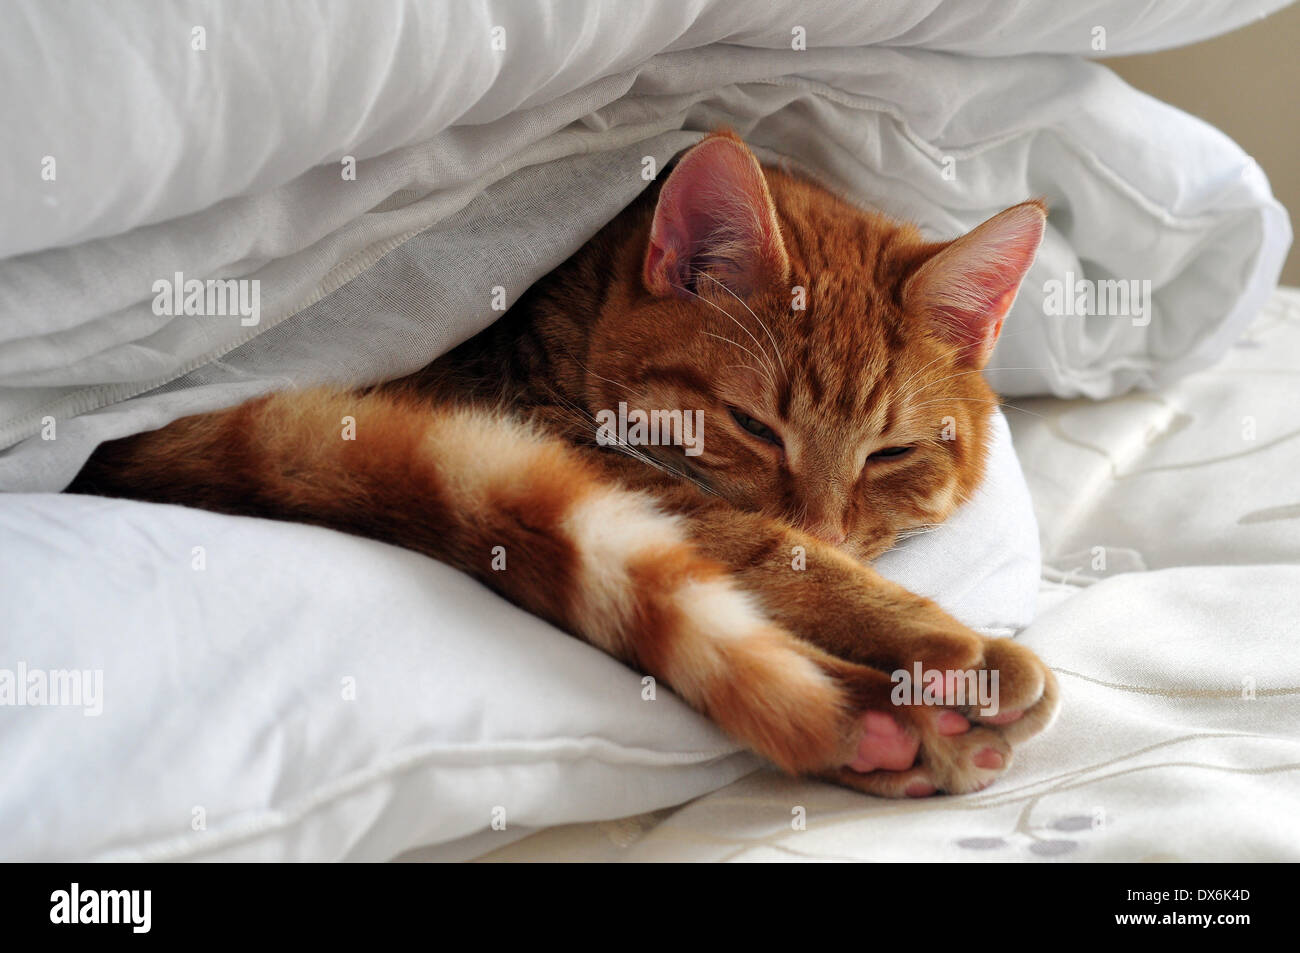 Aberystwyth, Wales, UK - Samson, a one year old ginger cat, has found the perfect spot for a cat-nap. He has sneaked in and is tucked into the clean bedding of the guest room... - 19- Mar-2014, Photo Credit: John Gilbey/Alamy Live News. Stock Photo